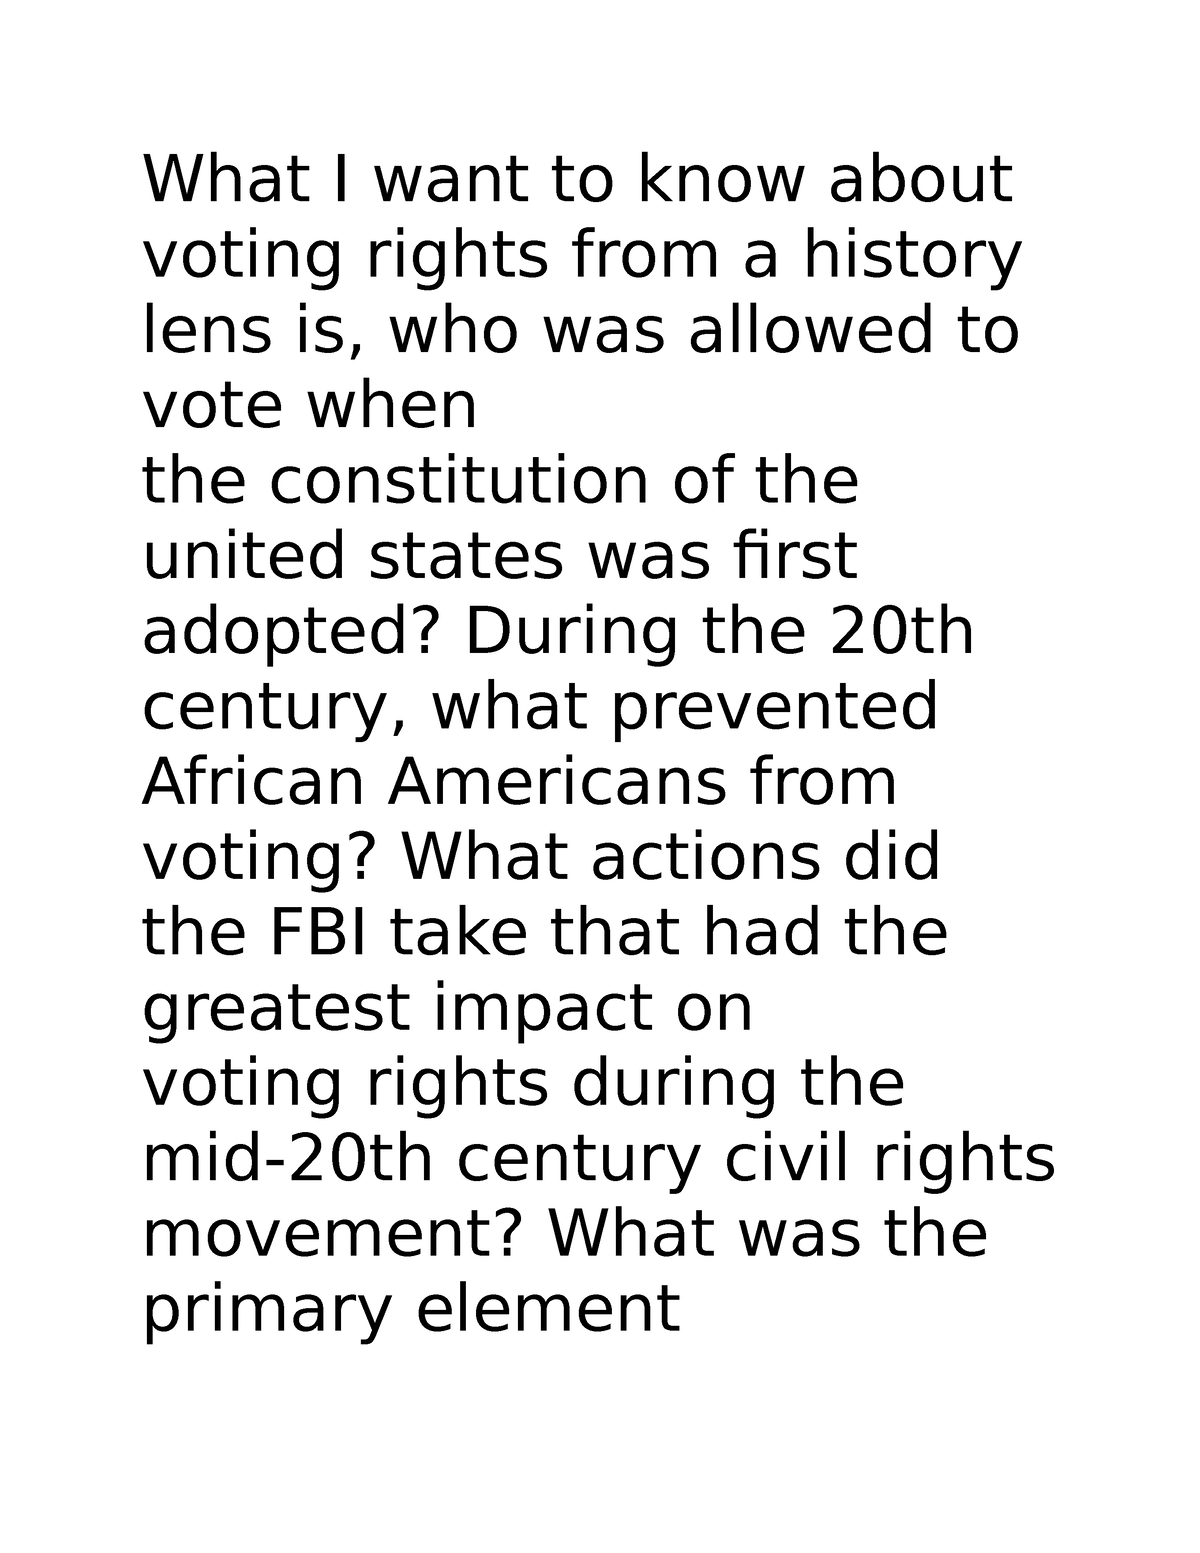 thesis statement on voting rights